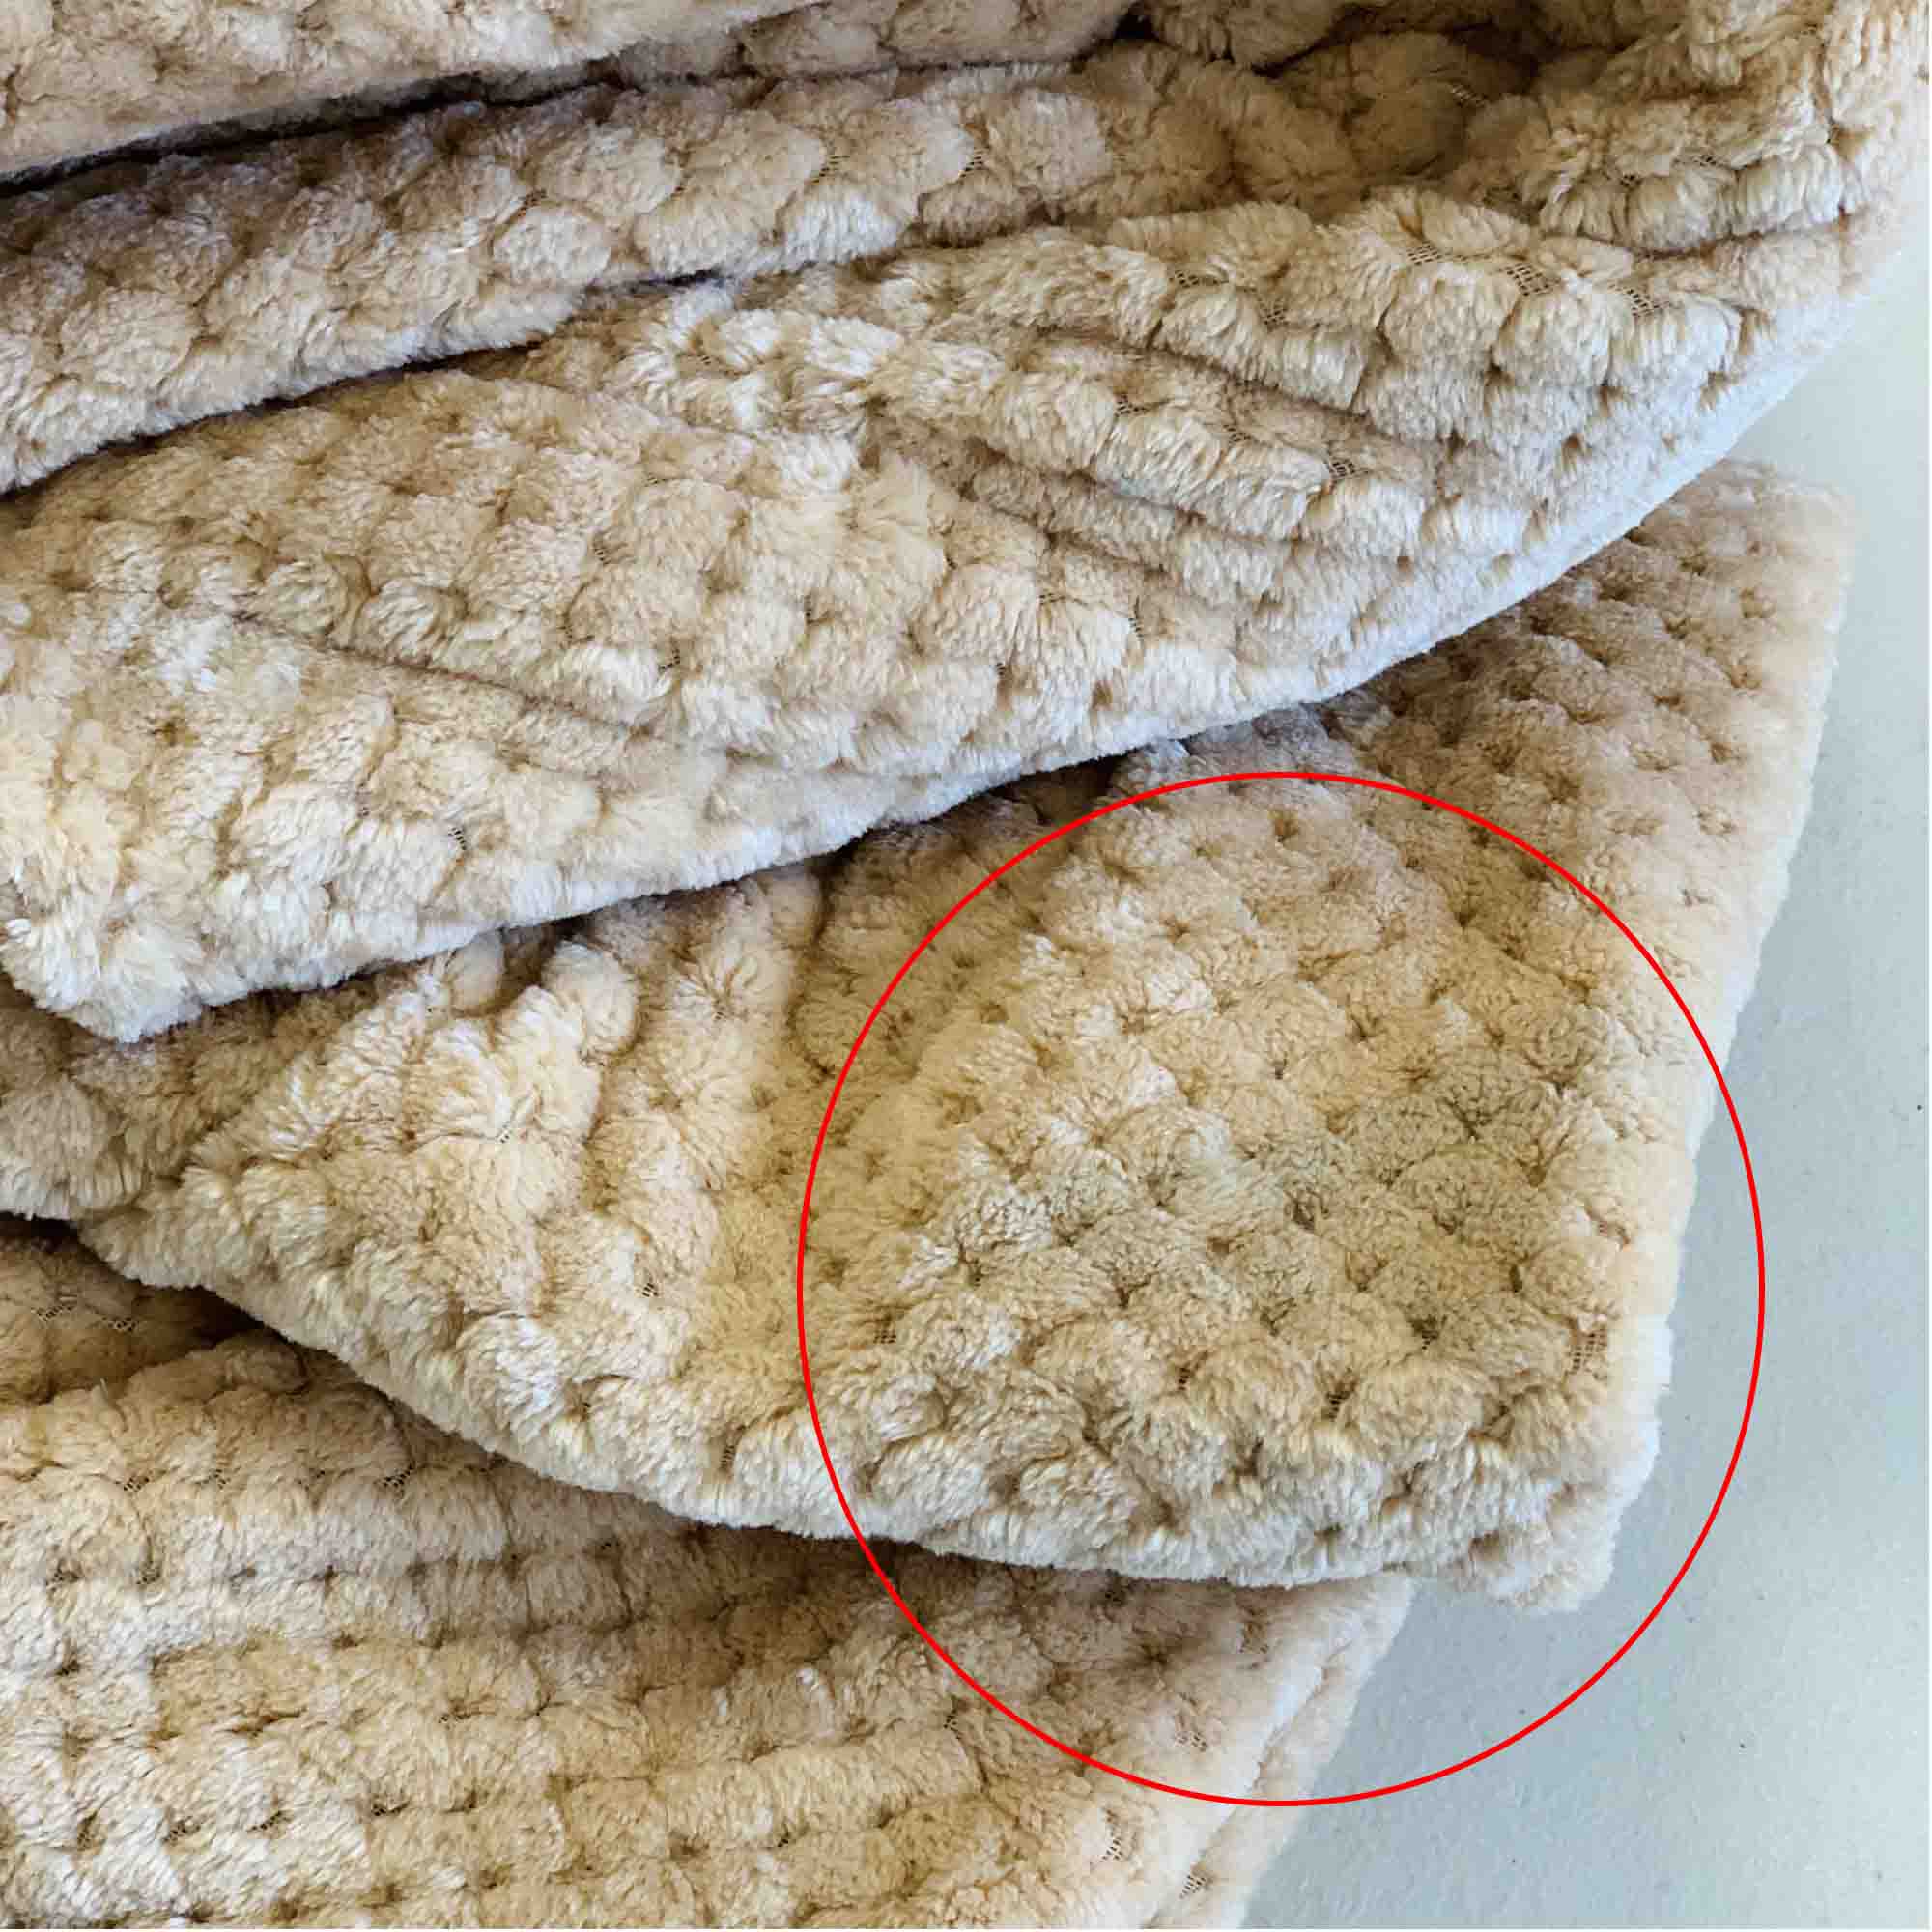 Imperfect Blankets - Dirty, Stained or Blemished (But Otherwise Fine) Blankets